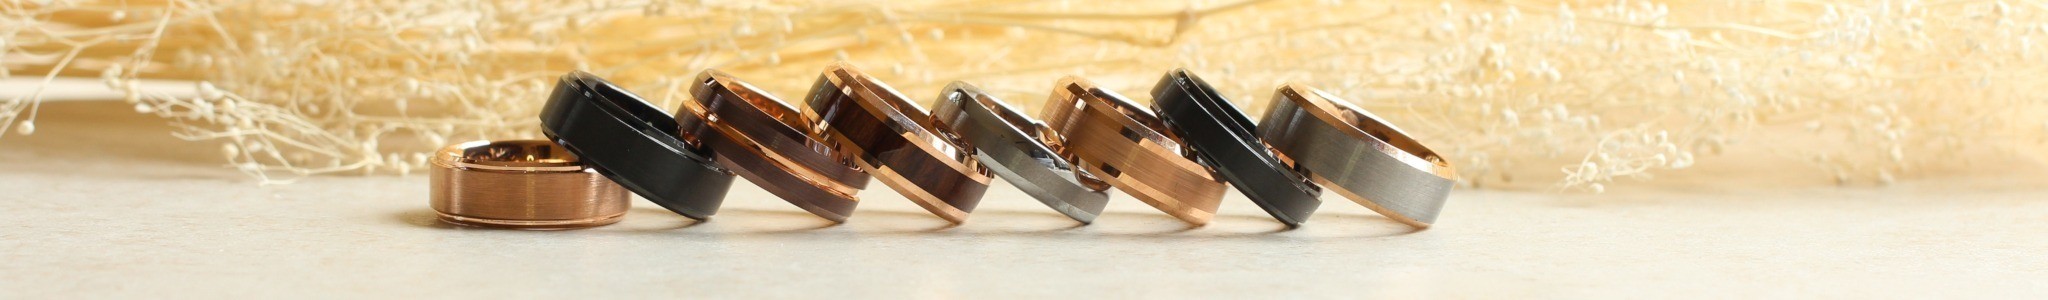 Tungsten Bands Product Line Image